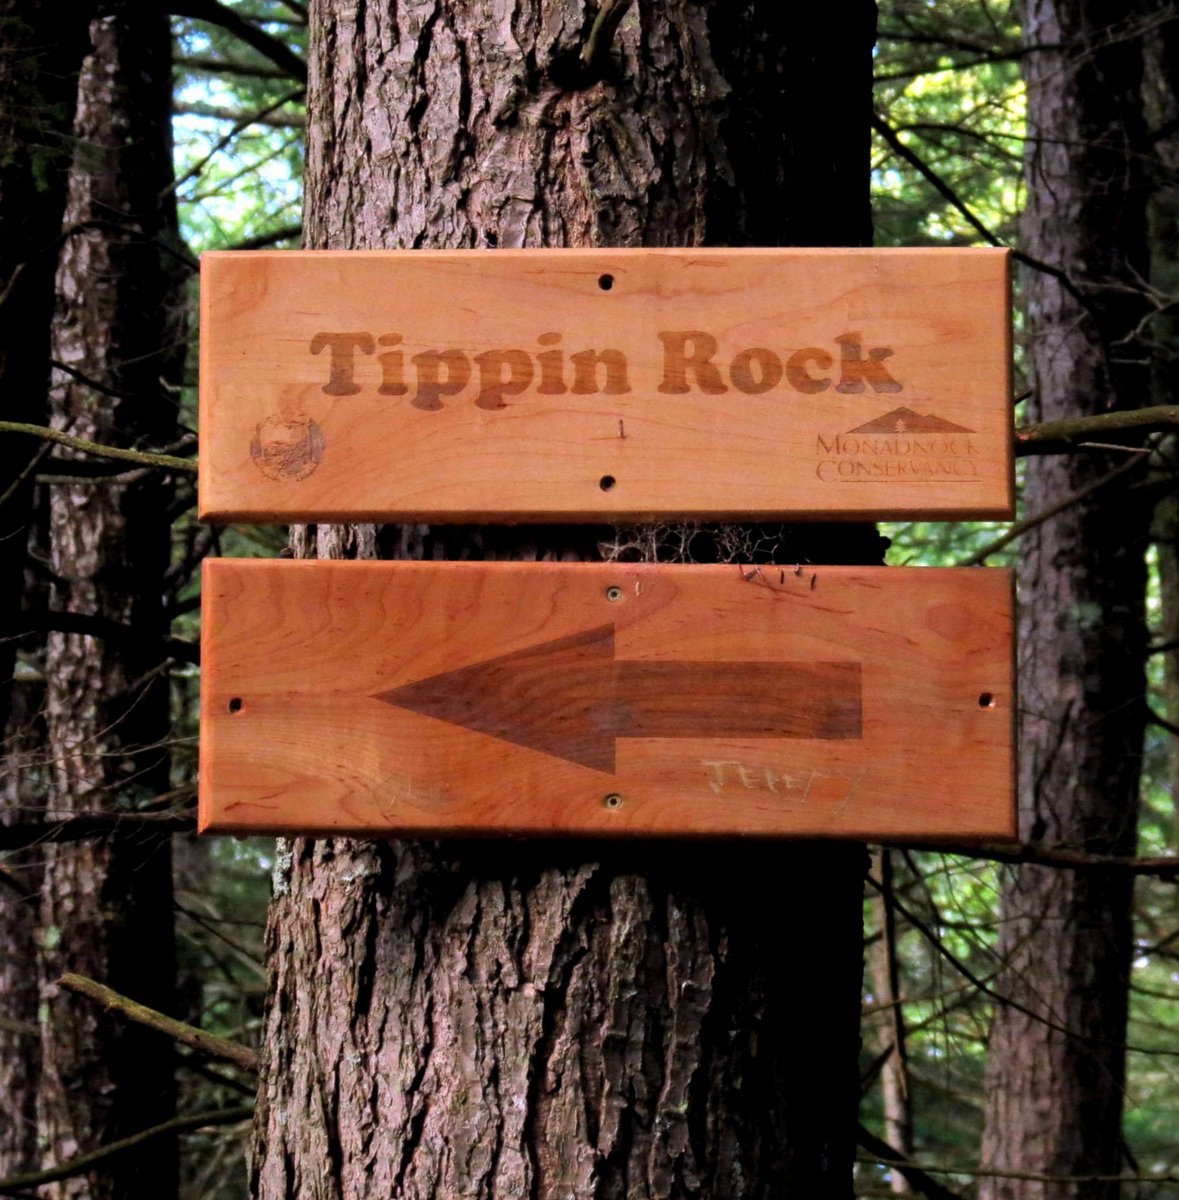 7. Tippin Rock Sign